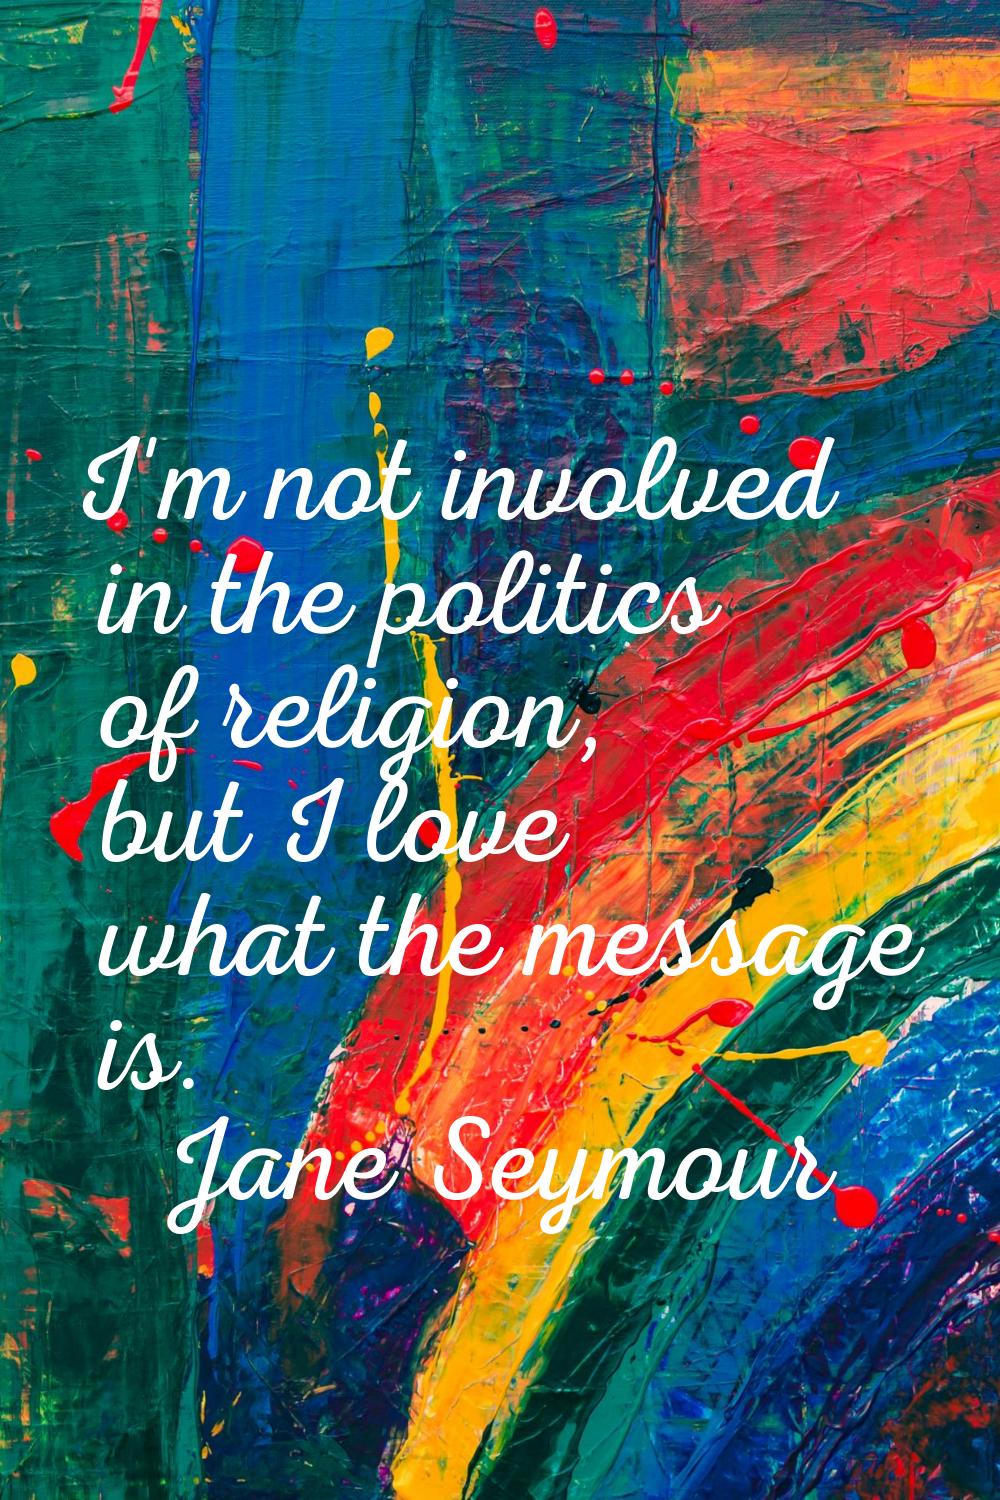 I'm not involved in the politics of religion, but I love what the message is.